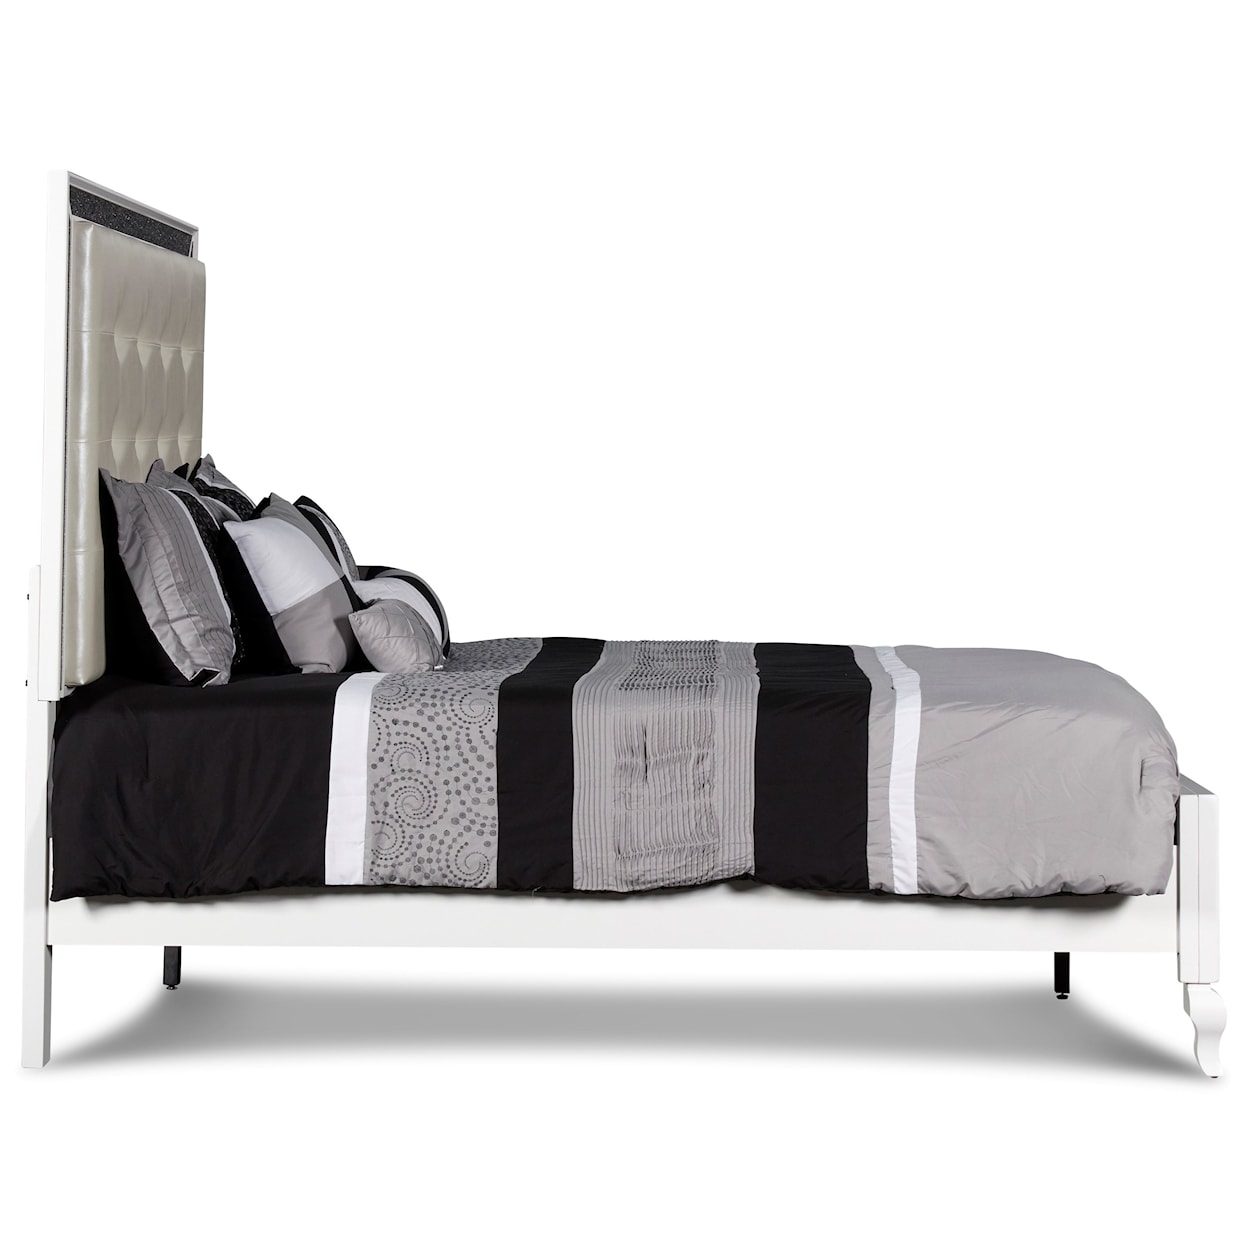 New Classic Park Imperial Full Bed